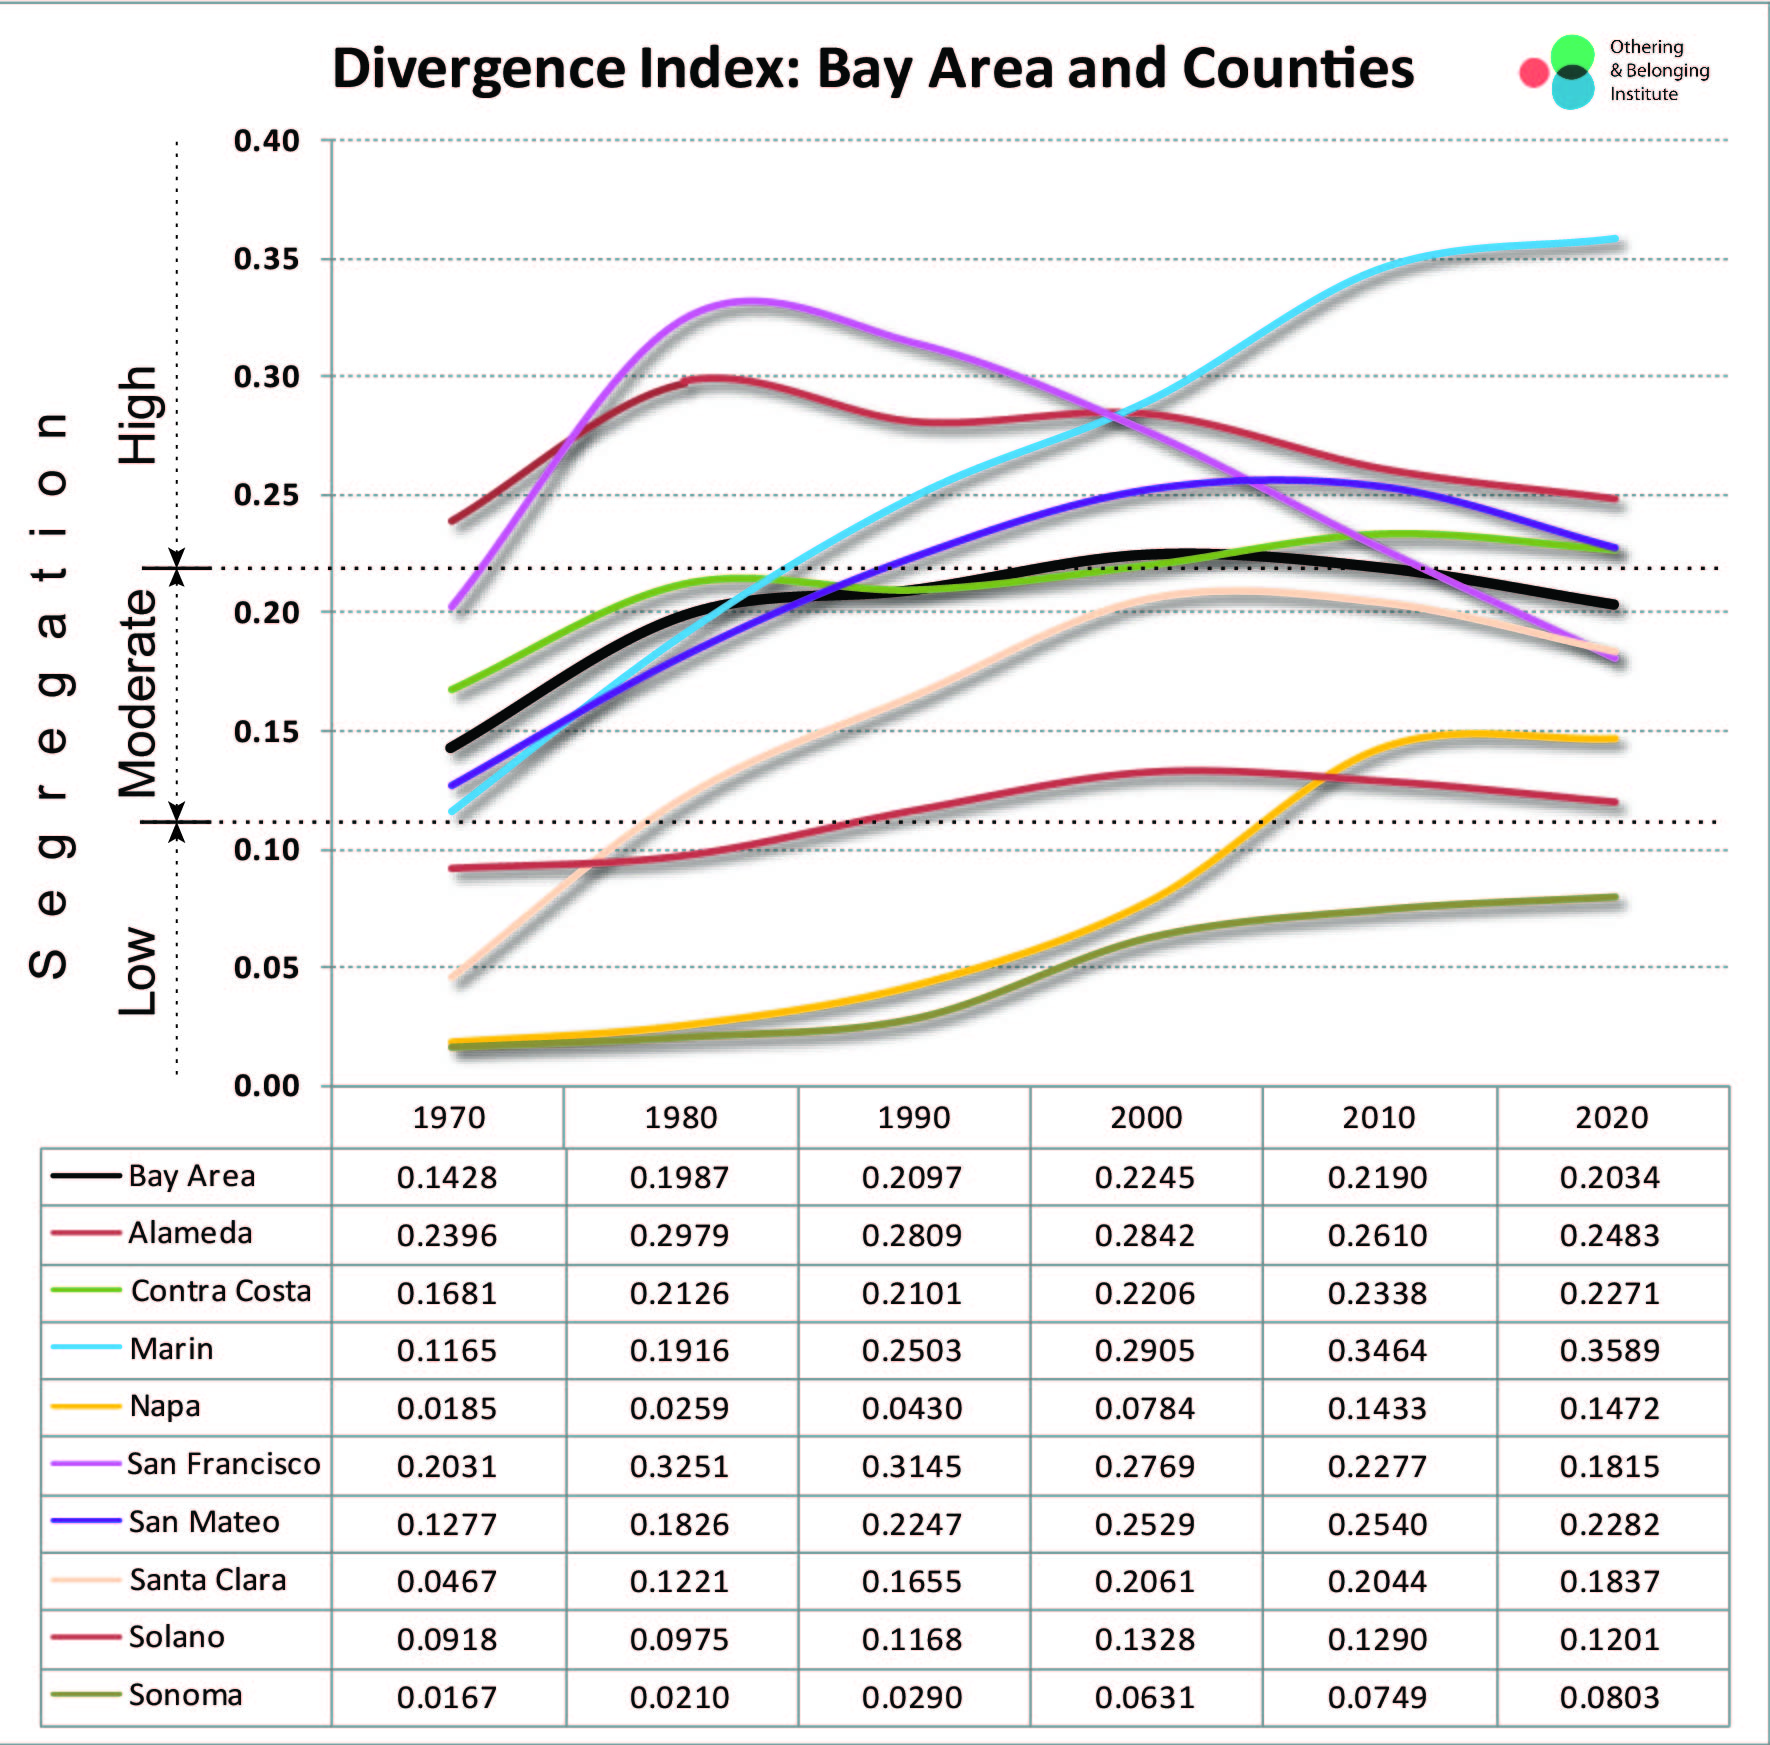 Line graph showing changes to divergence index in the Bay Area from 1970 to 2020.